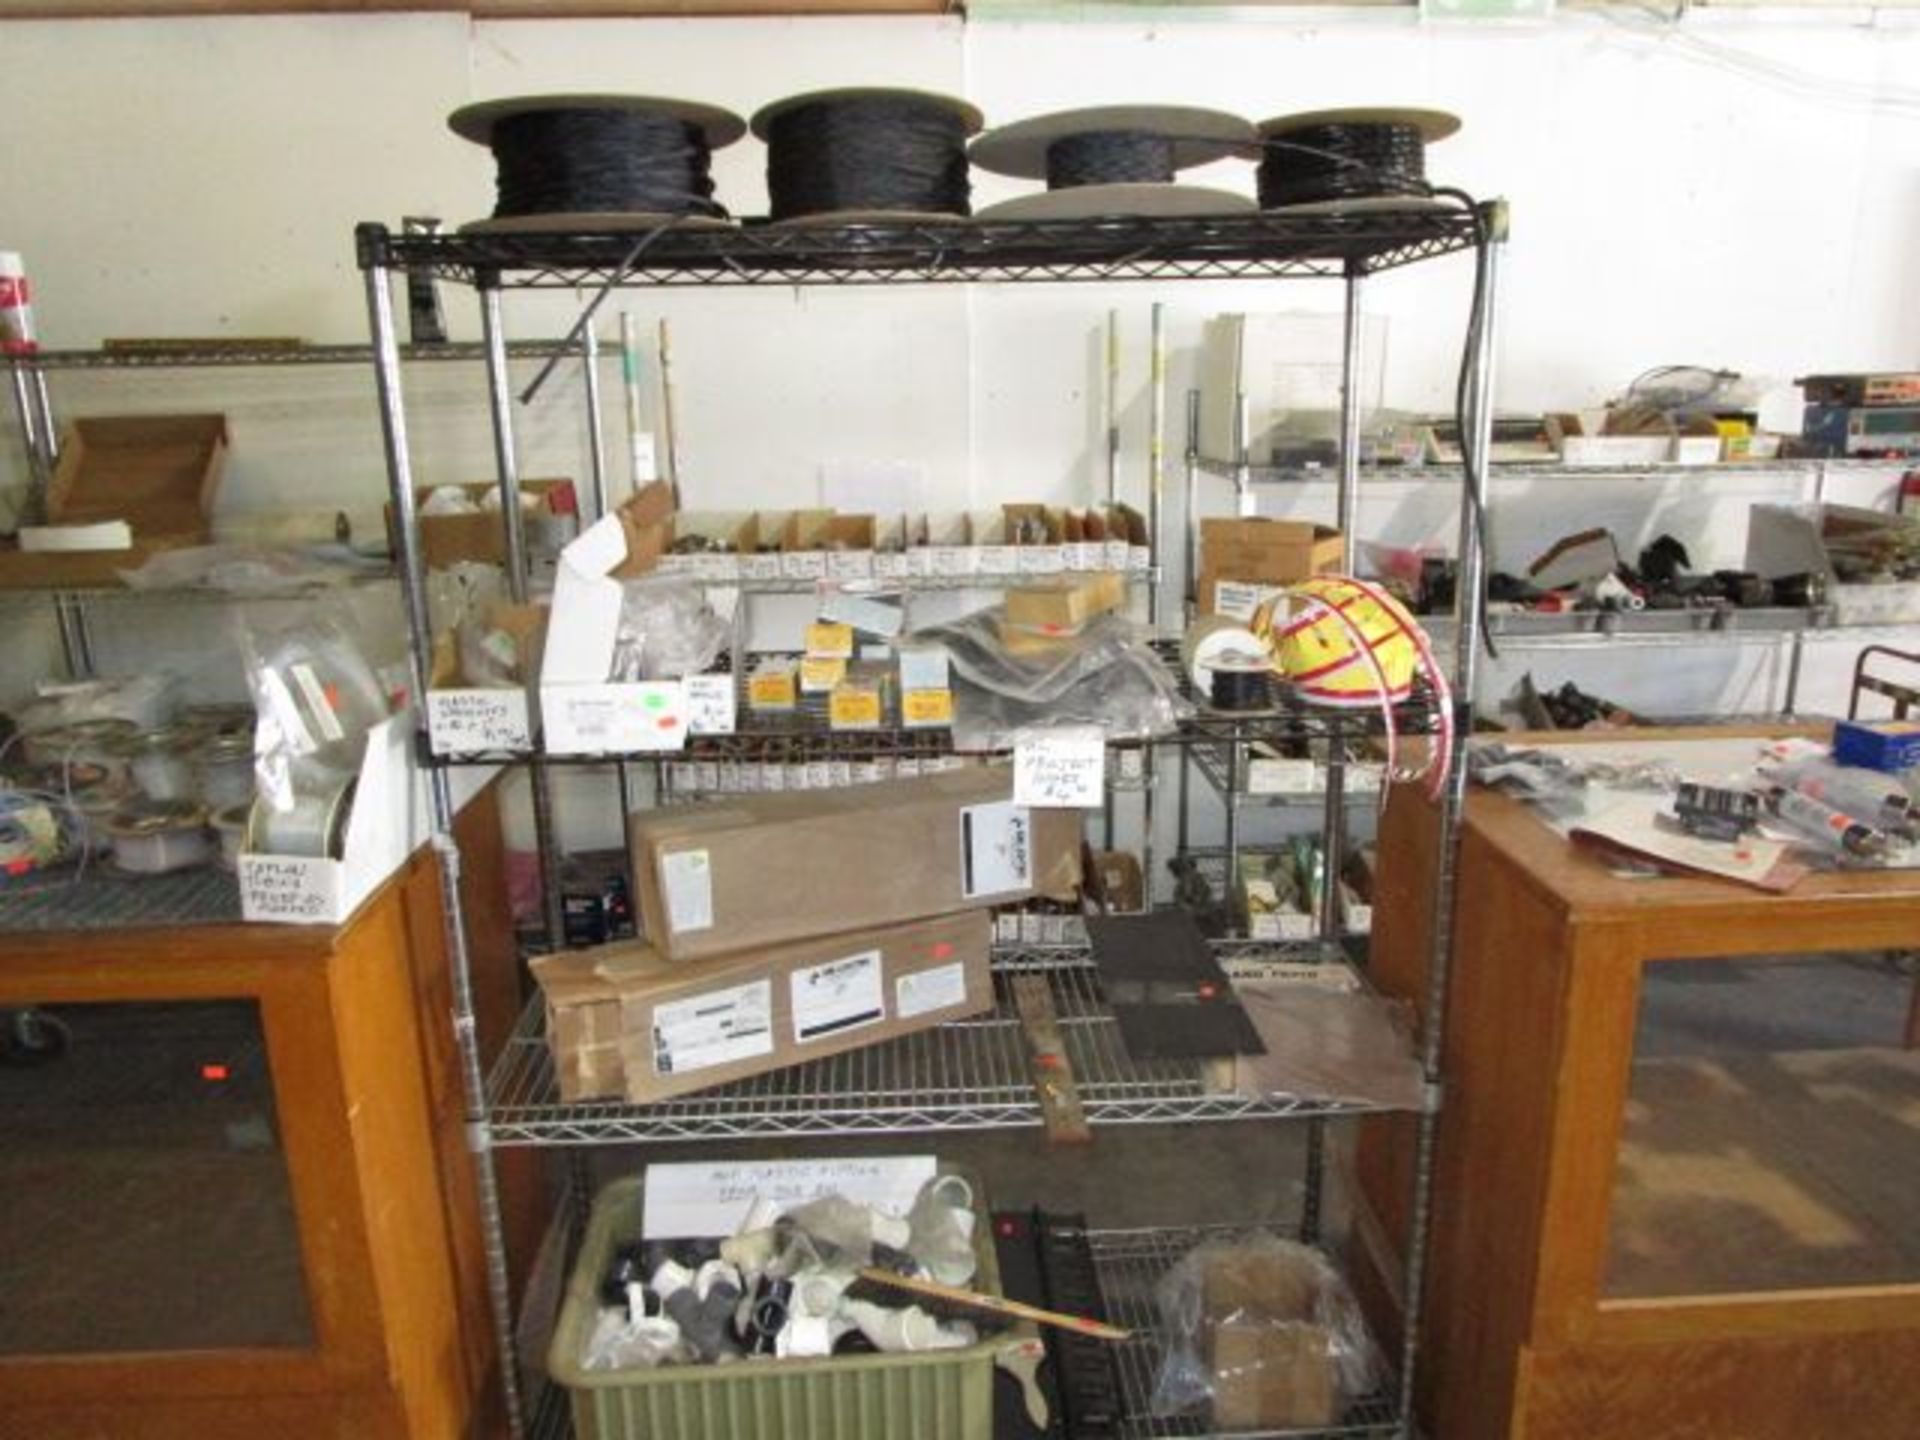 SHELVING UNIT OF CORD/ROPE, BOX OF CHASSIS, PLASTIC FITTINGS